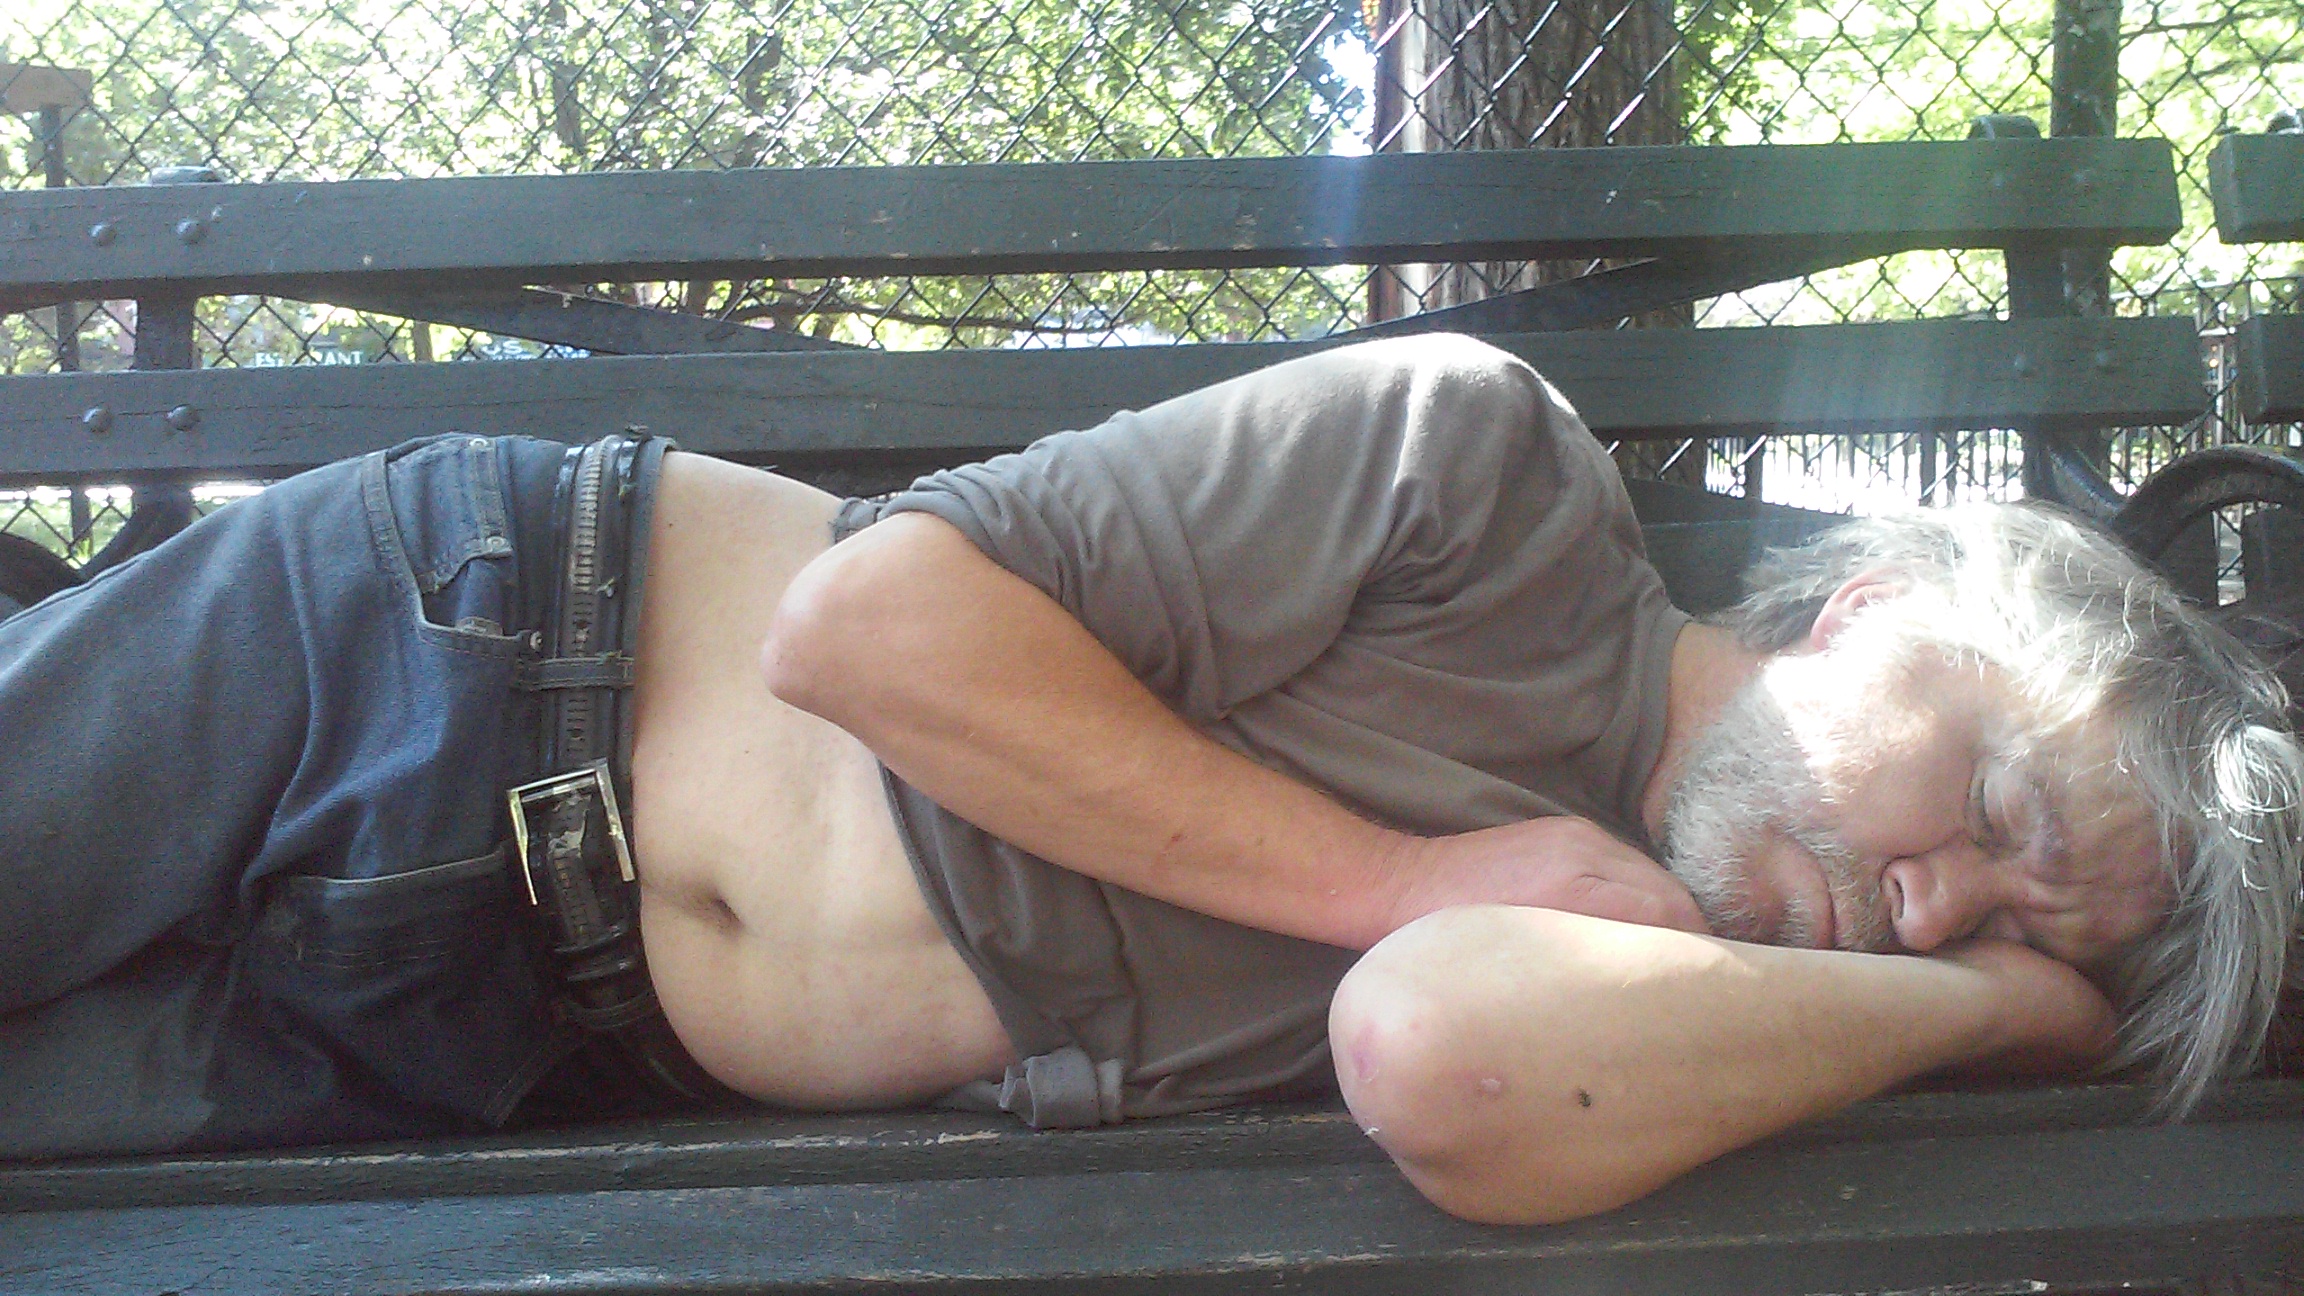 Another man sleeping on a bench in Tompkins Square Park.